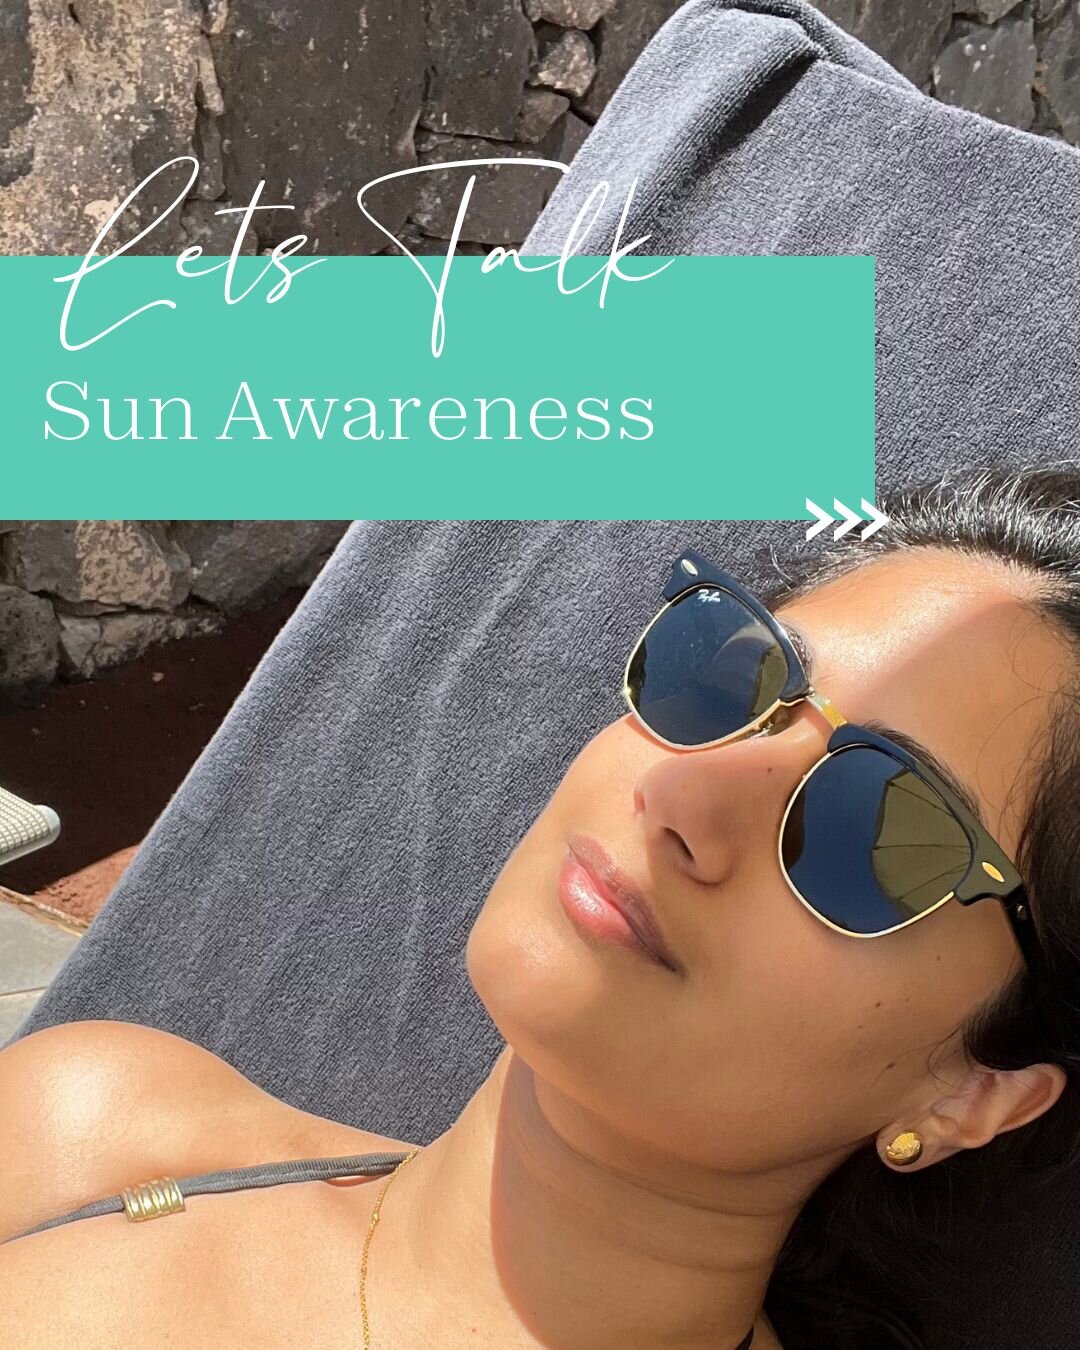 ☀️ Did you know that UV radiation from the sun can pass through cloud cover and window glass, and is even reflected from shiny surfaces? 😎 

Protect your skin this summer by using a tinted sunscreen for a safe and beautiful glow 🌟 I love using prod